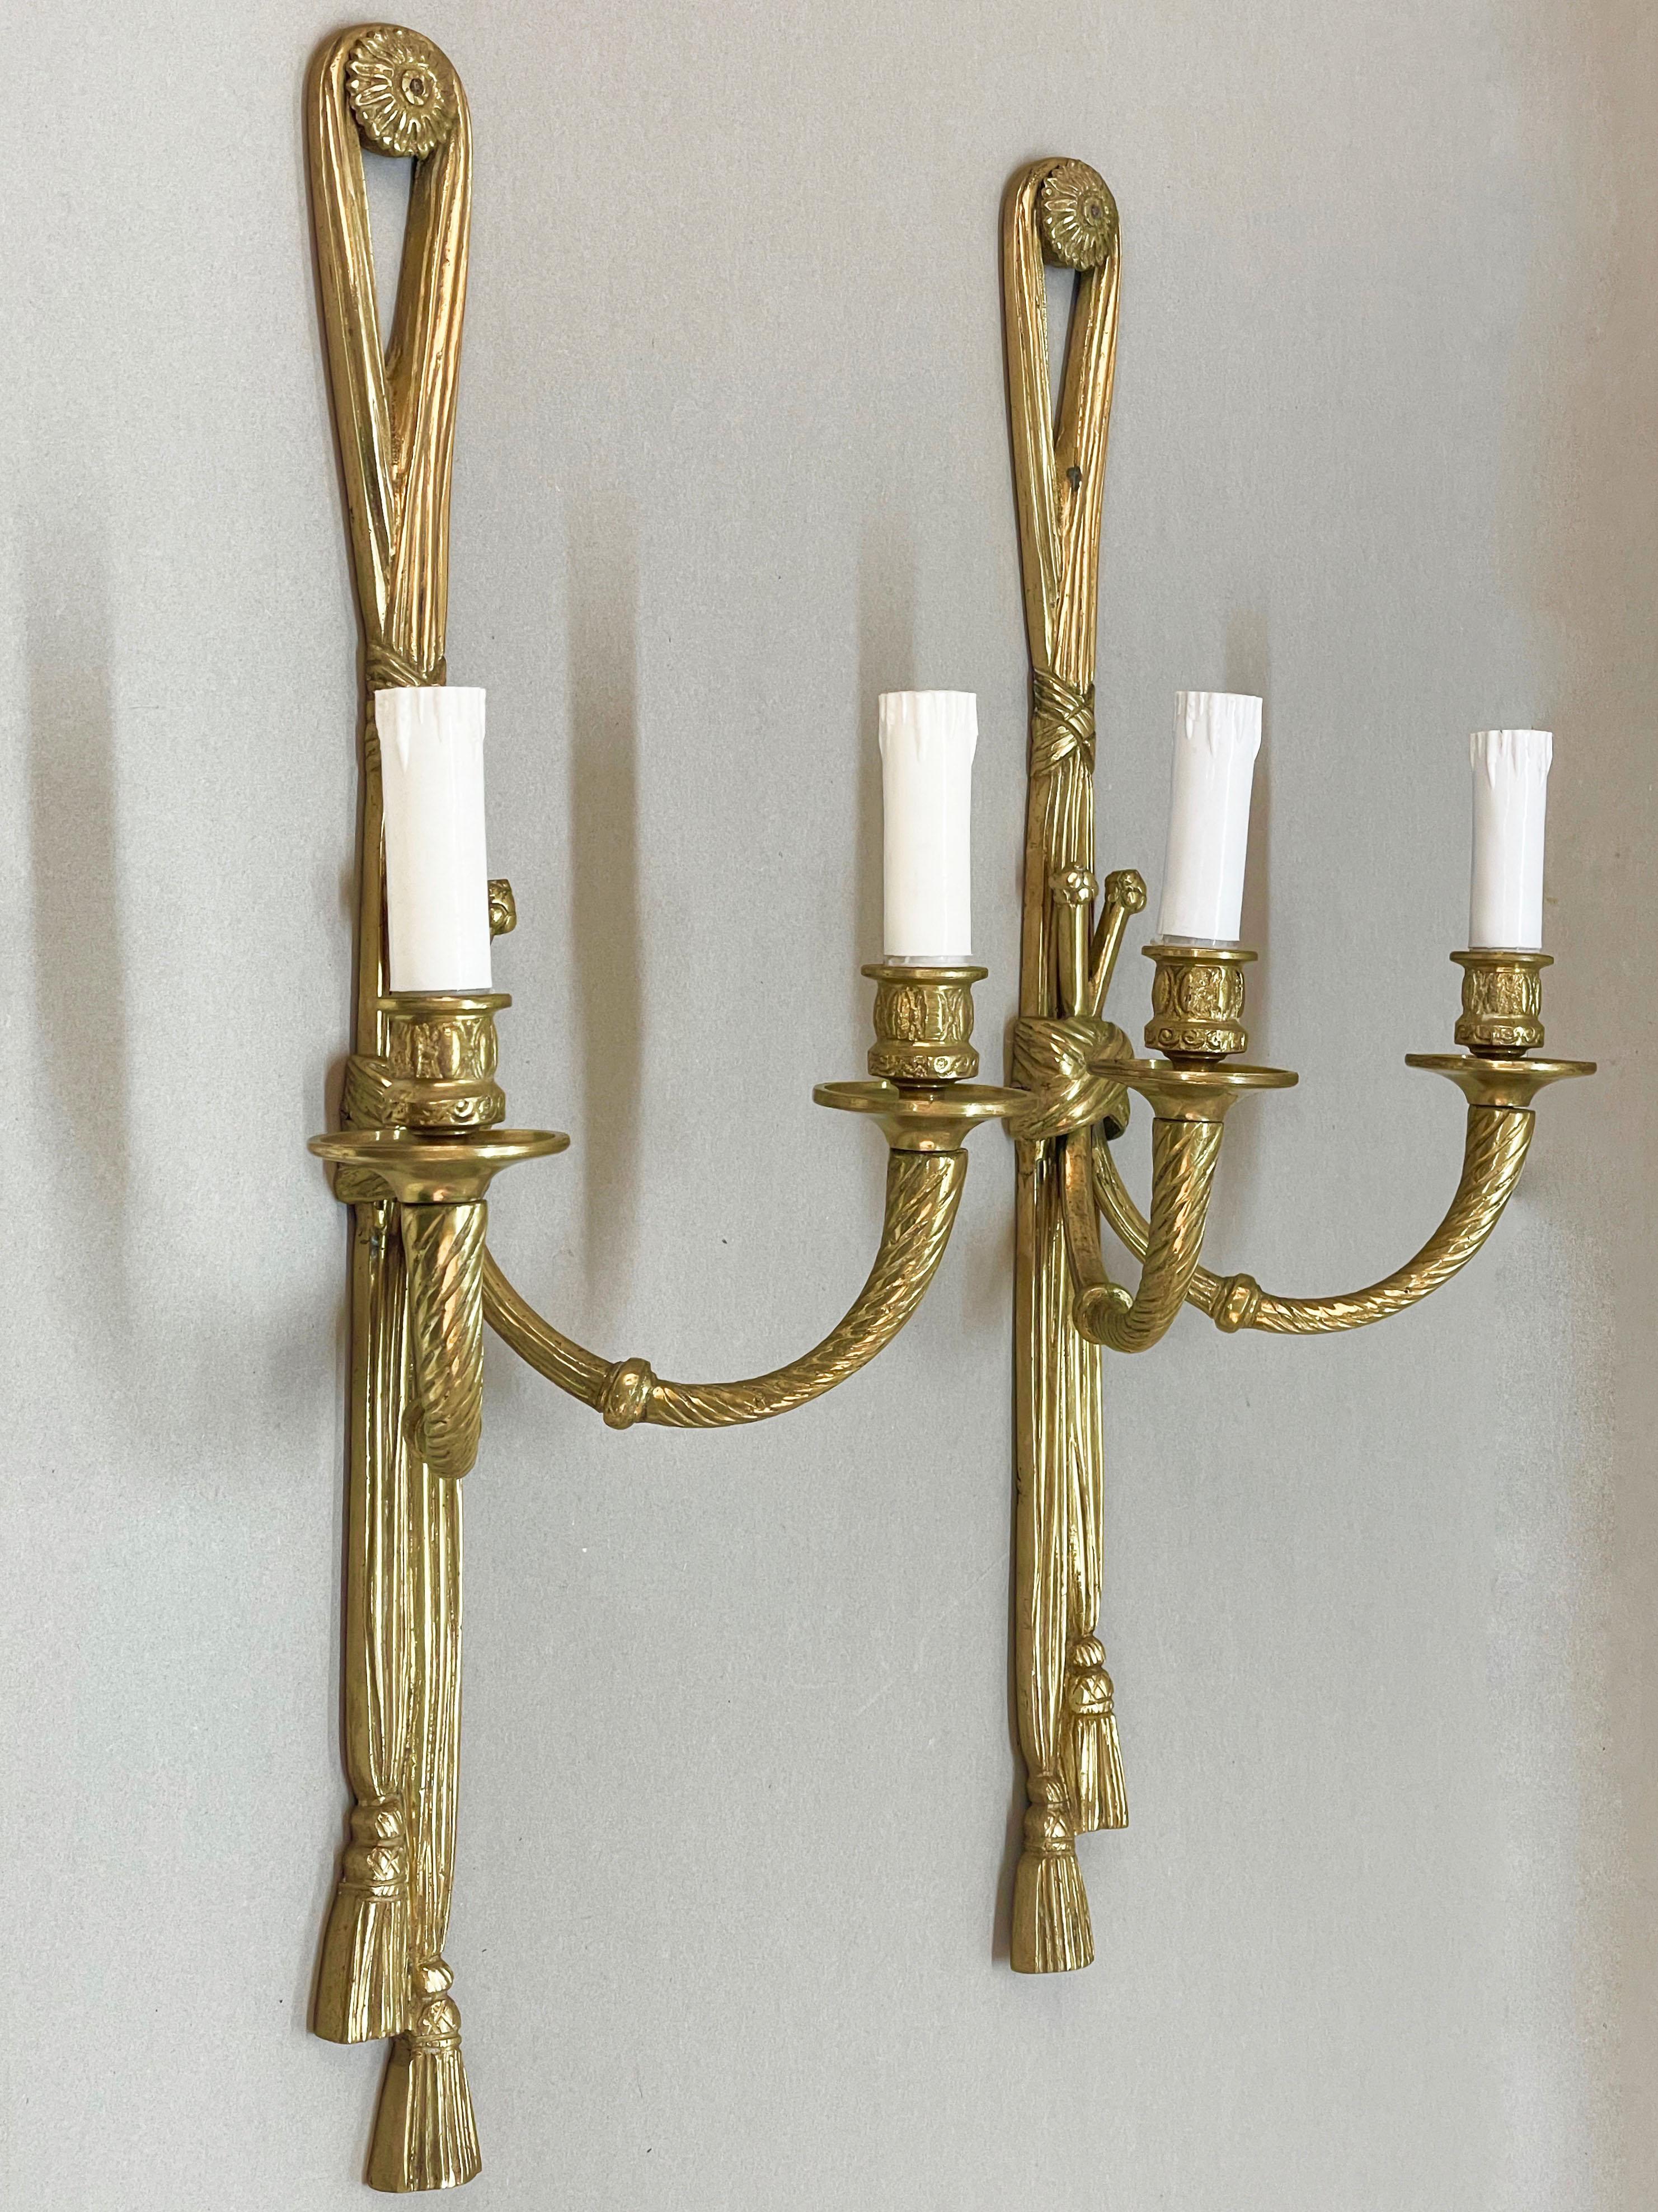 Pair of 19th Century Louis XVI Style Knot & Tassel Appliqué Wall Candle Sconces For Sale 1